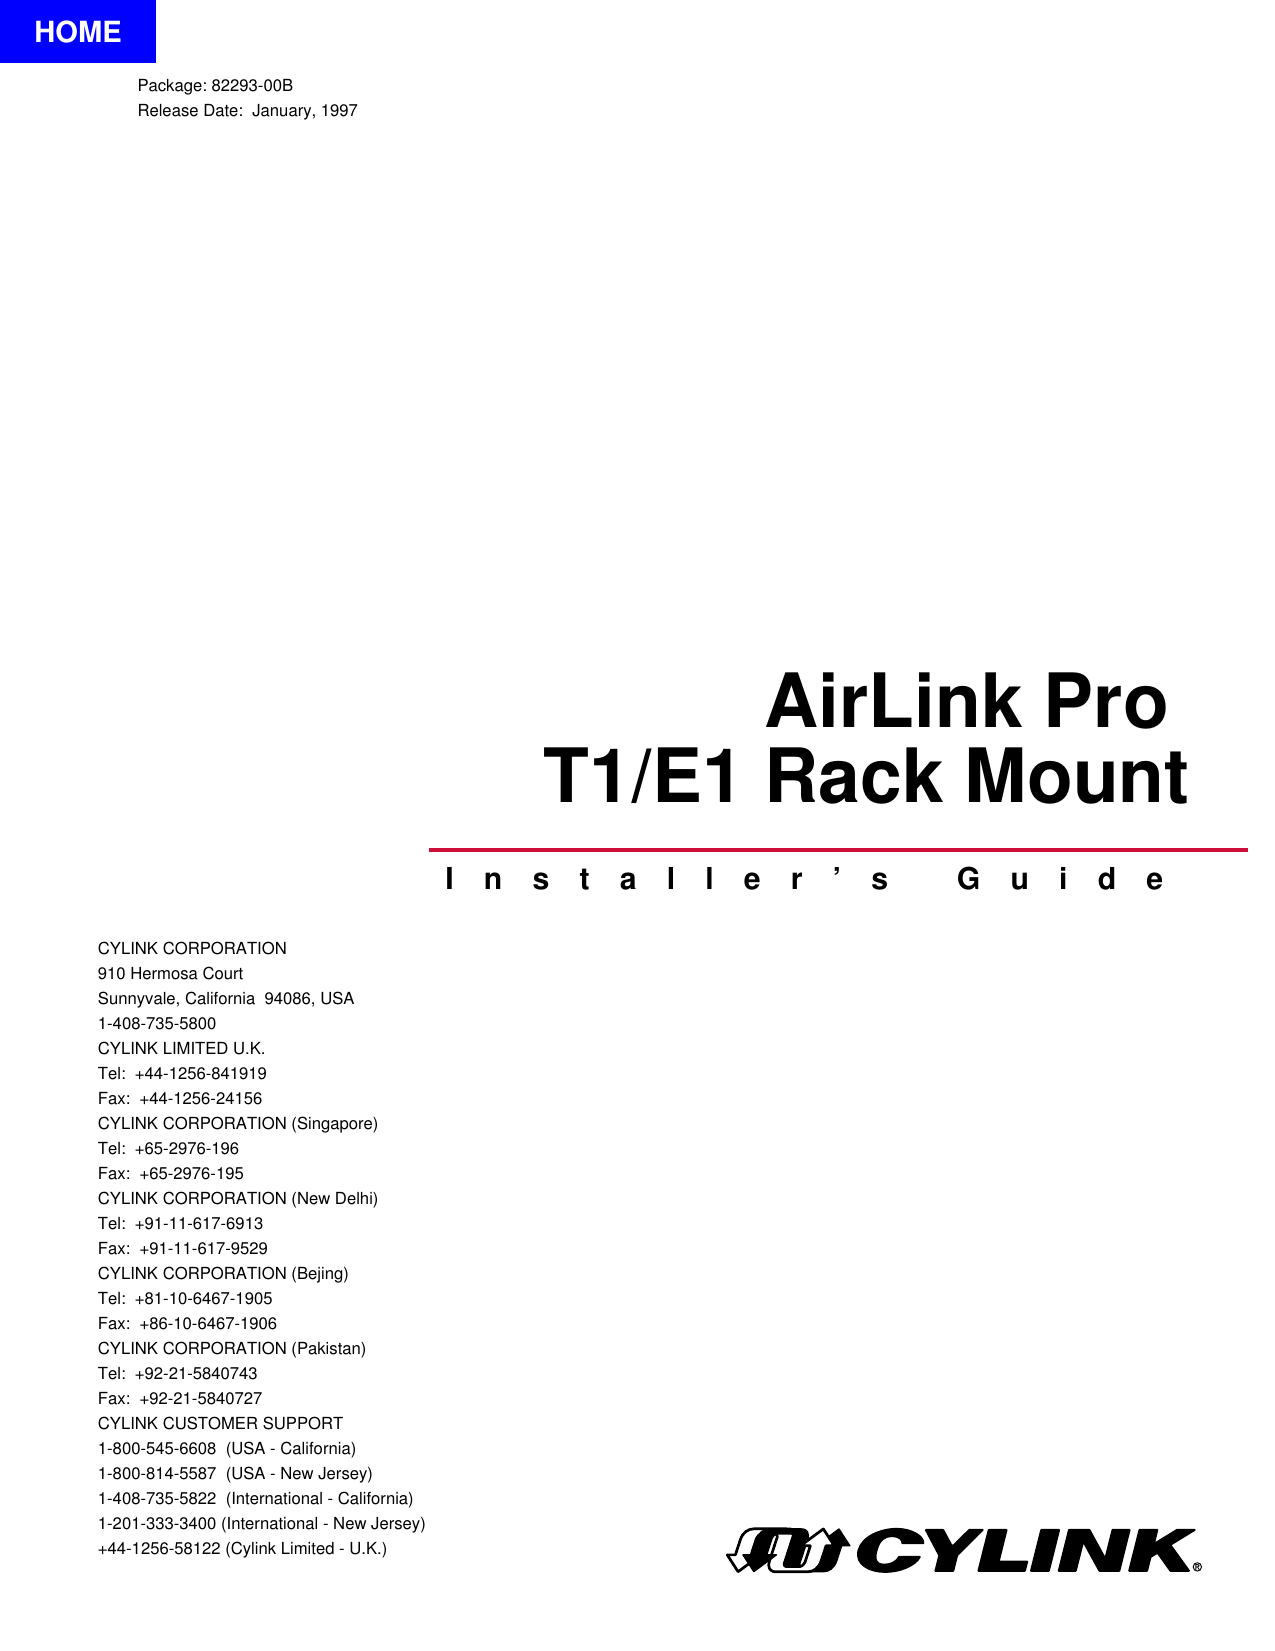 AirLink Pro T1/E1 Rack MountPackage: 82293-00BRelease Date:  January, 1997CYLINK CORPORATION 910 Hermosa CourtSunnyvale, California  94086, USA1-408-735-5800CYLINK LIMITED U.K.Tel:  +44-1256-841919Fax:  +44-1256-24156CYLINK CORPORATION (Singapore)Tel:  +65-2976-196Fax:  +65-2976-195CYLINK CORPORATION (New Delhi)Tel:  +91-11-617-6913Fax:  +91-11-617-9529CYLINK CORPORATION (Bejing)Tel:  +81-10-6467-1905Fax:  +86-10-6467-1906 CYLINK CORPORATION (Pakistan)Tel:  +92-21-5840743Fax:  +92-21-5840727CYLINK CUSTOMER SUPPORT1-800-545-6608  (USA - California)1-800-814-5587  (USA - New Jersey)1-408-735-5822  (International - California)1-201-333-3400 (International - New Jersey)+44-1256-58122 (Cylink Limited - U.K.)Installer’s GuideHOME